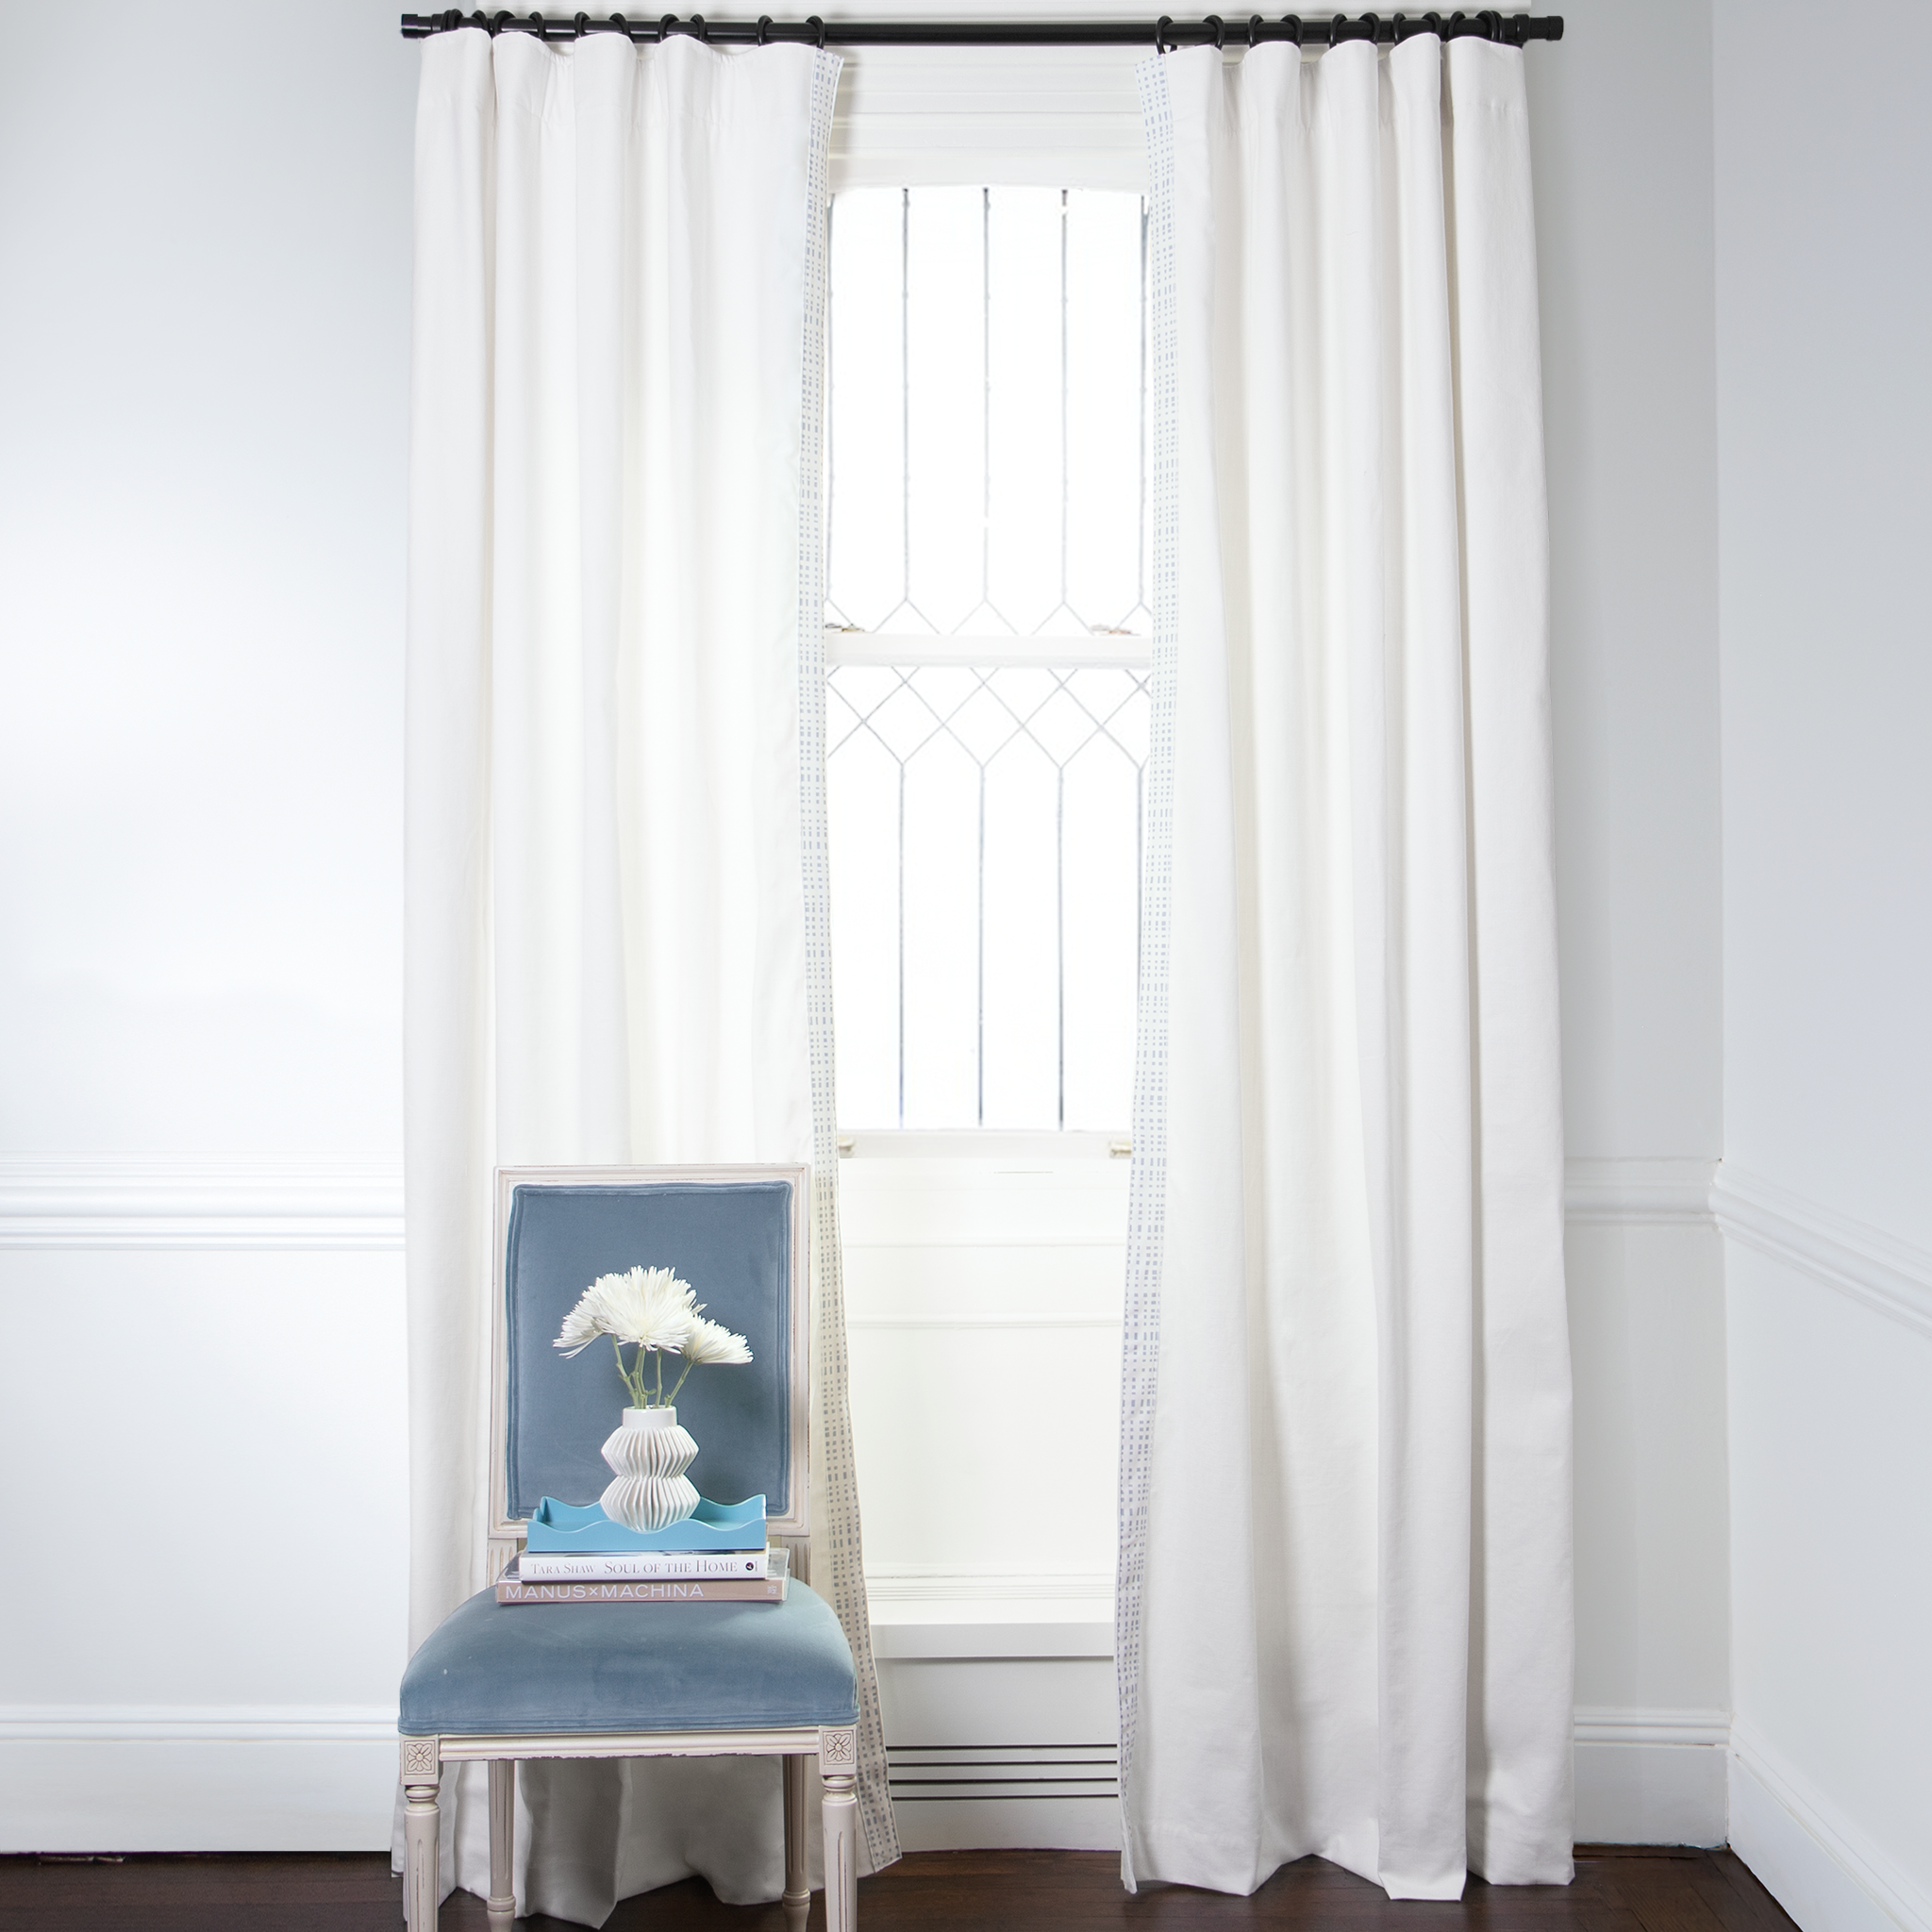 Snow Curtain - Pinch Pleat, 25"W x 93"L, Privacy Lining, Fern Velvet Band on the left side